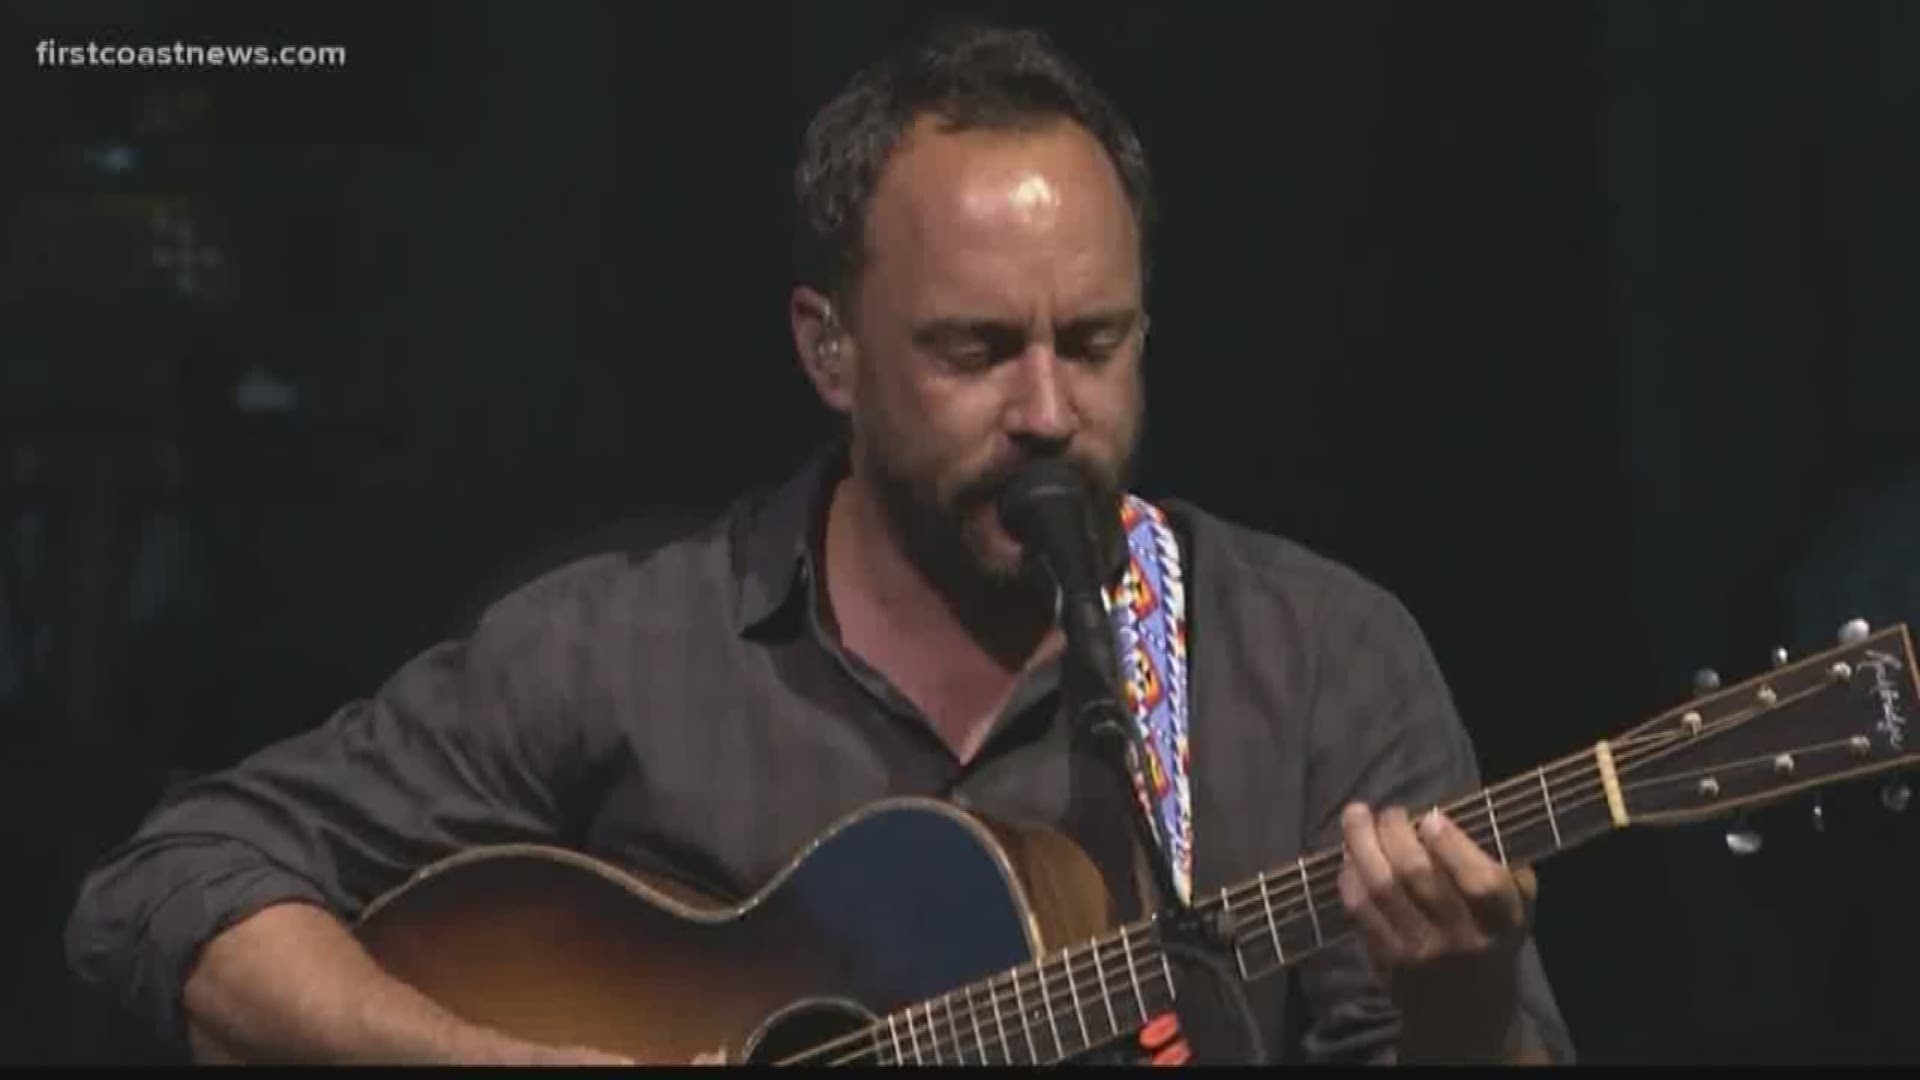 Known for hits like "Crash Into Me," "Crush" and "Ants Marching," the Dave Matthews Band will play at the Jacksonville Veterans Memorial Arena in May.